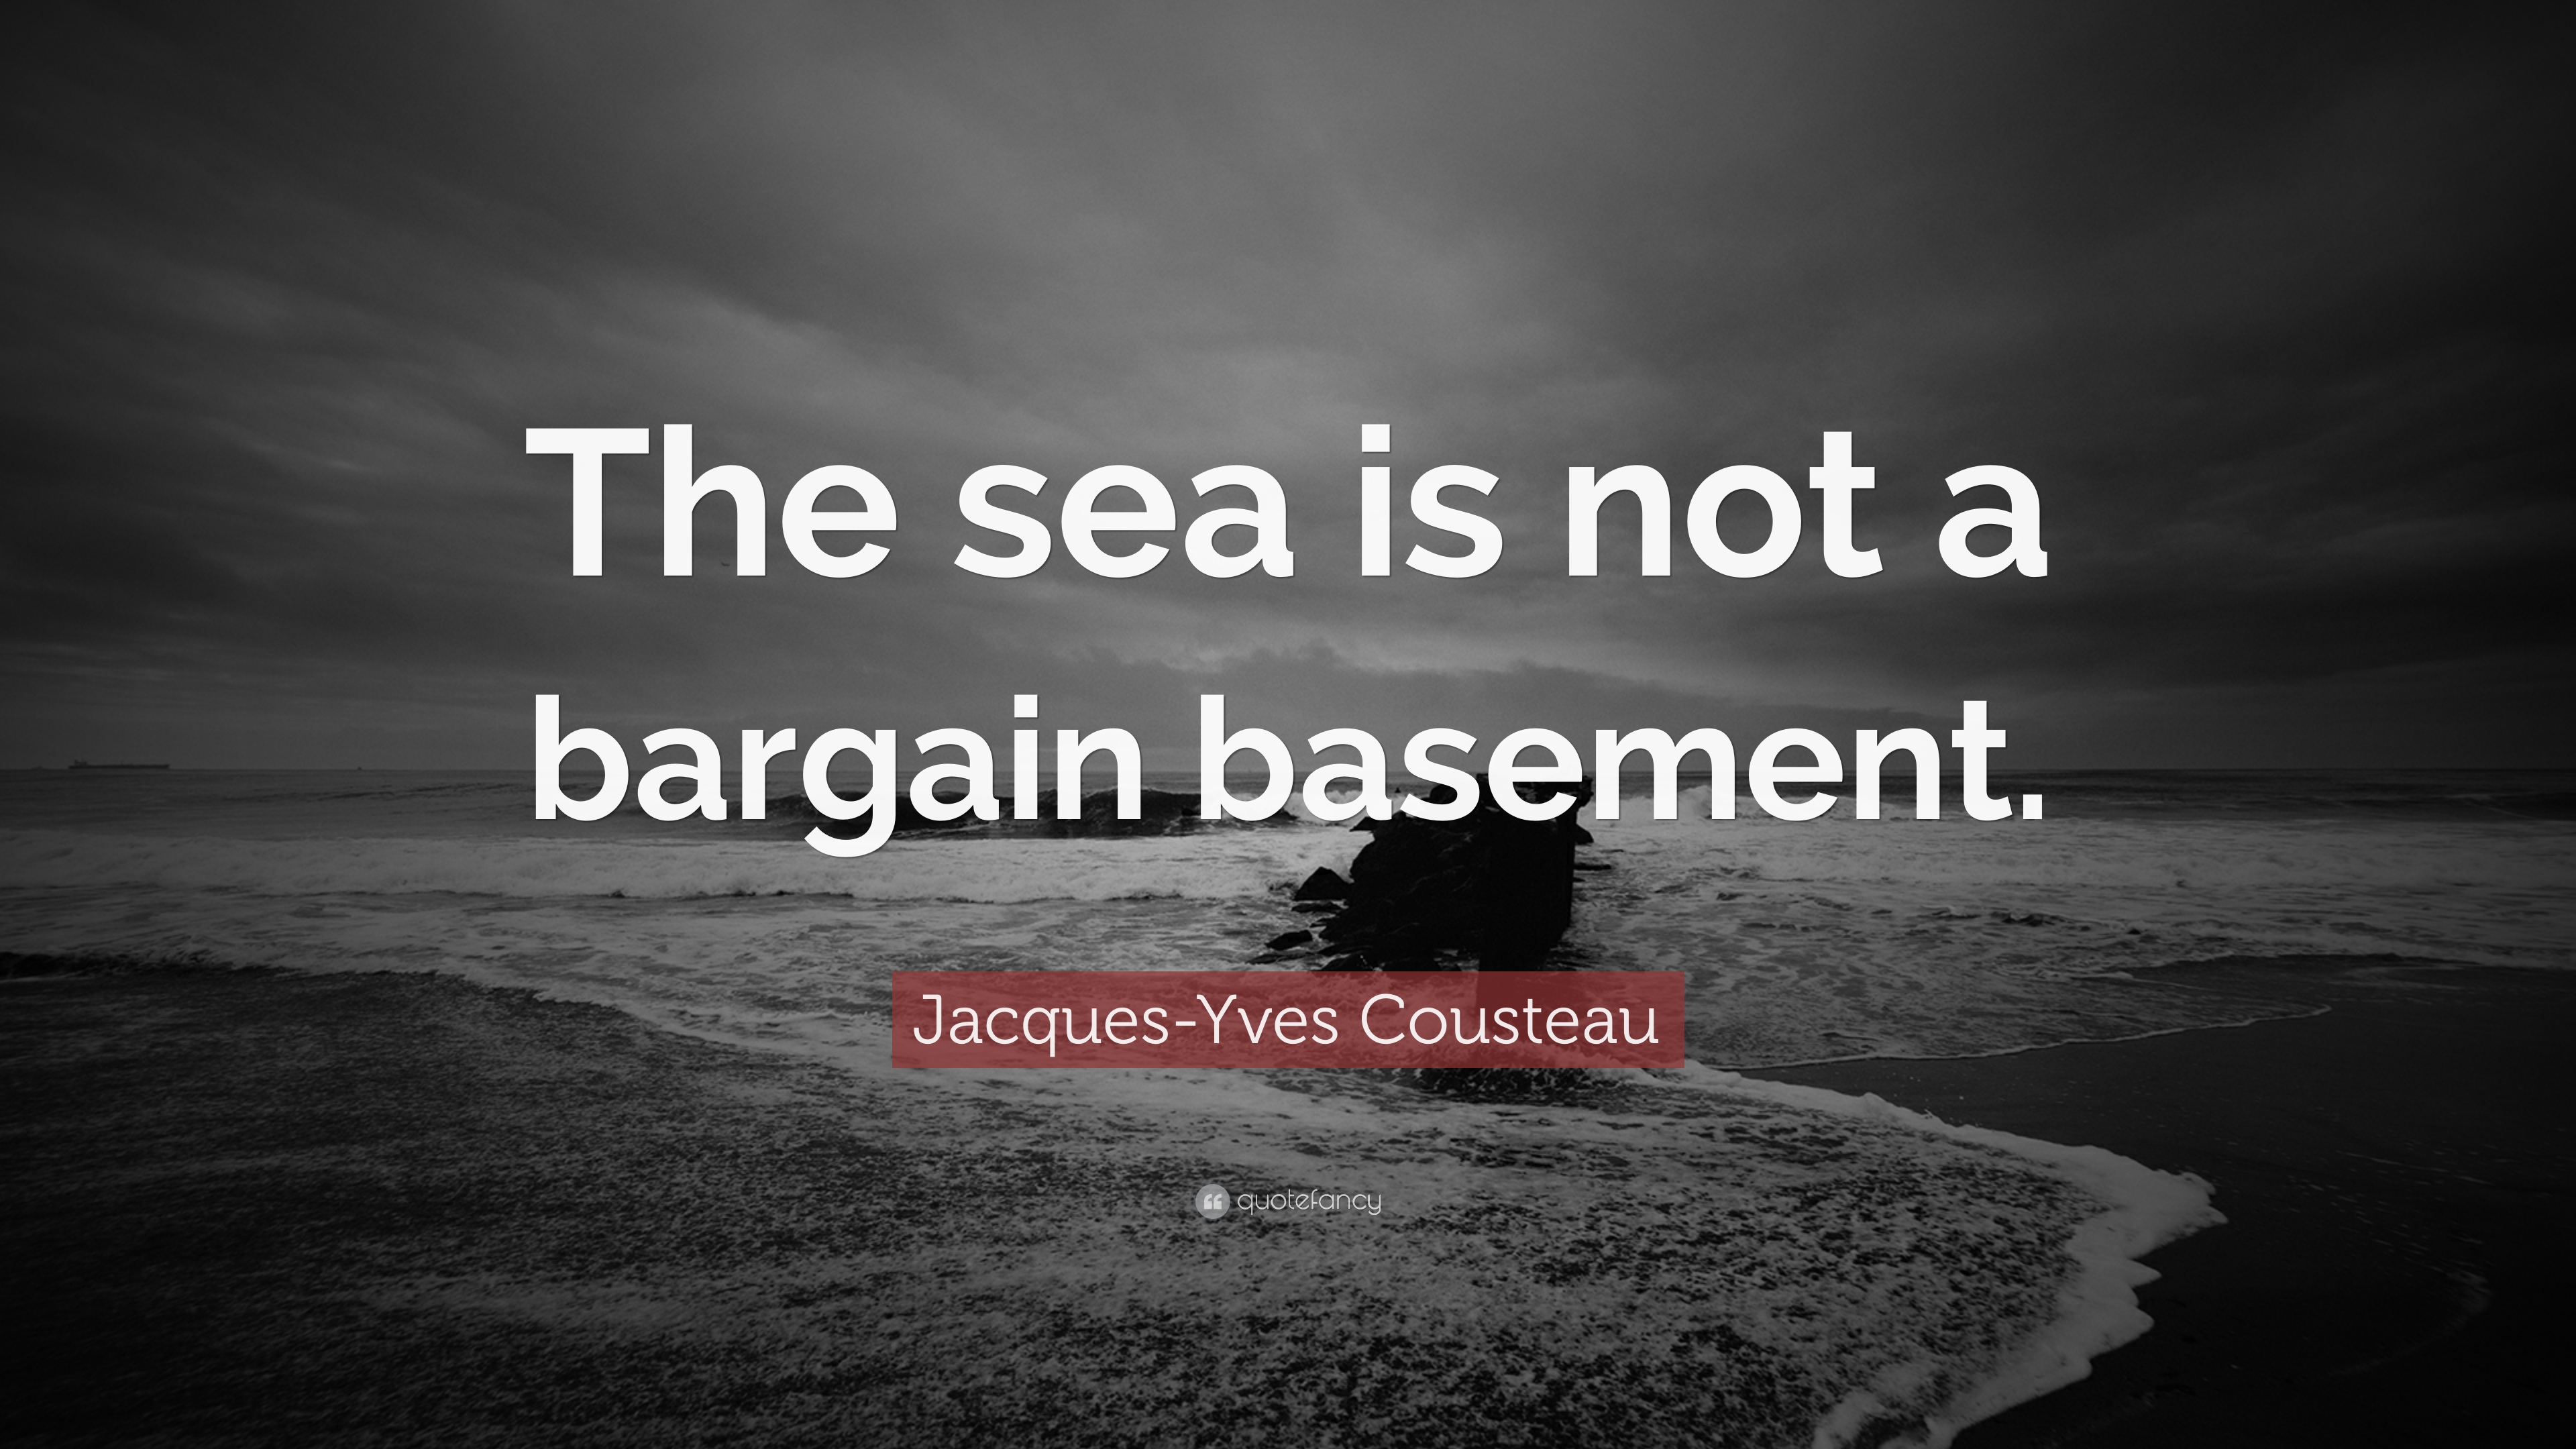 Jacques Yves Cousteau Quote: “The Sea Is Not A Bargain Basement.” 7